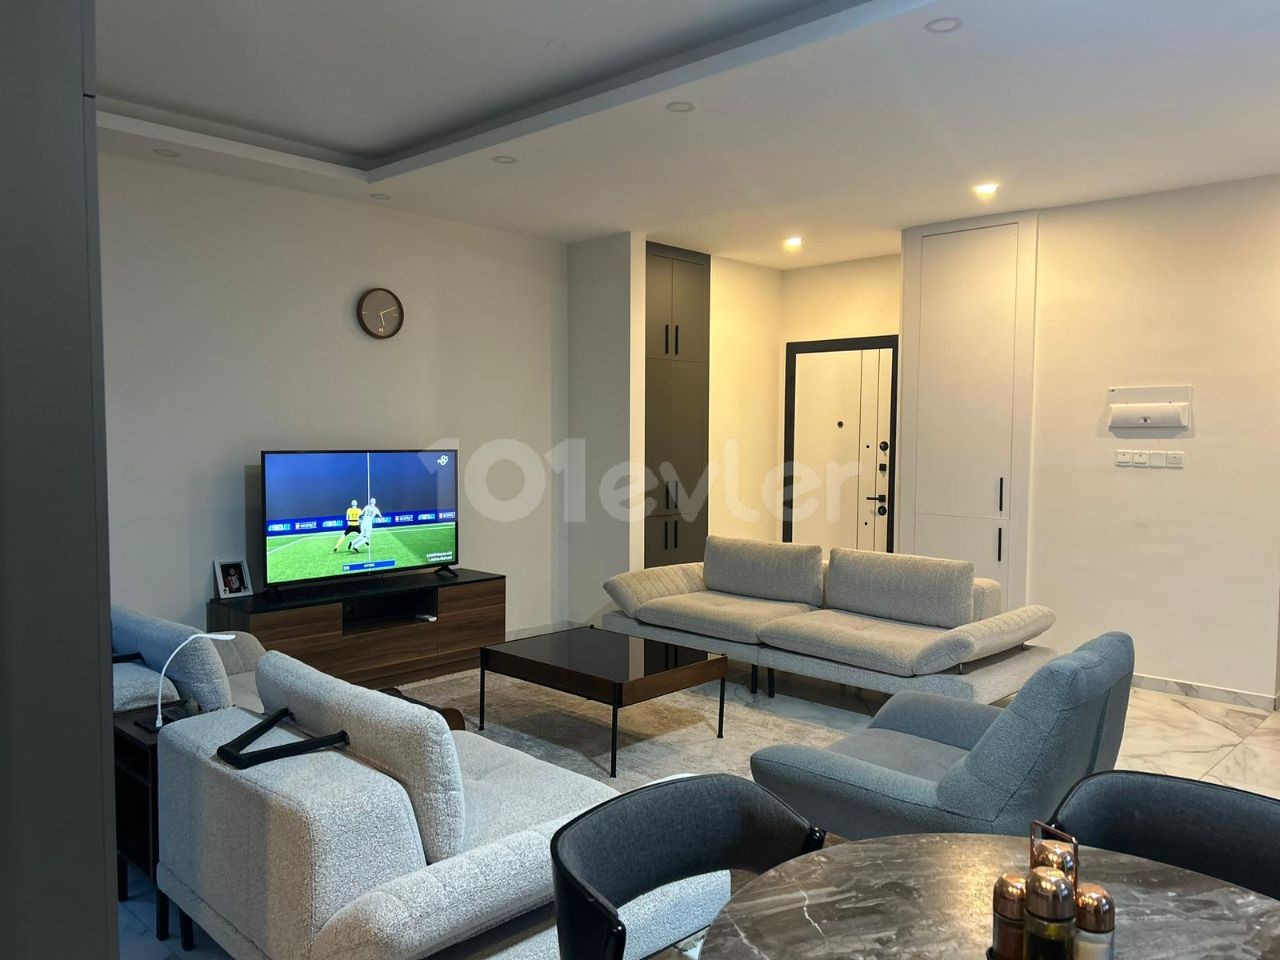 FOR SALE Penthouse in a complex with pool 2+1, furnished, luxury